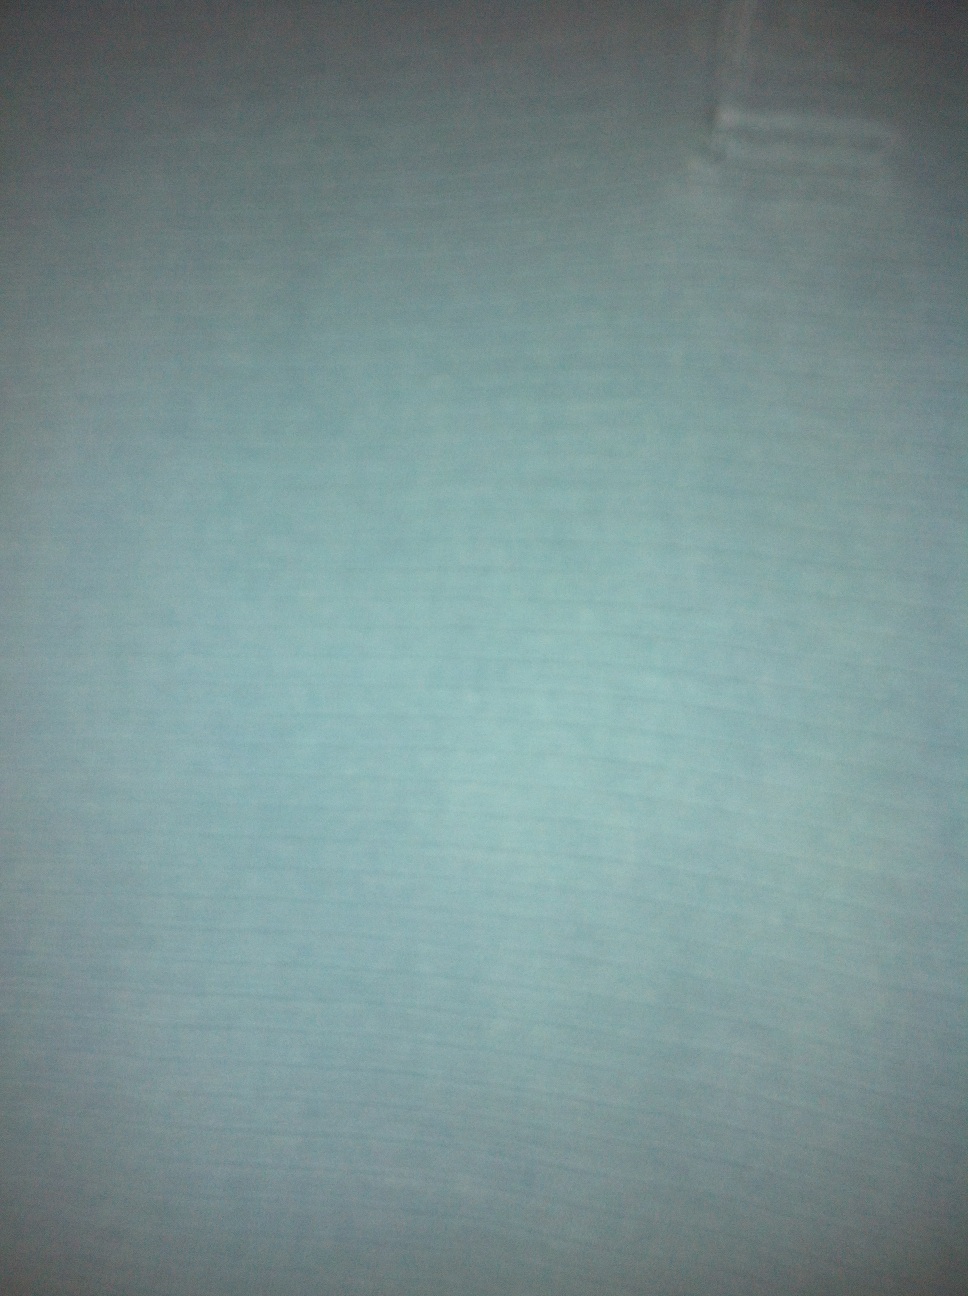 A photo captured by a person who is blind. A computer-generated caption for this photo is: A close up of a wall with a blue background.